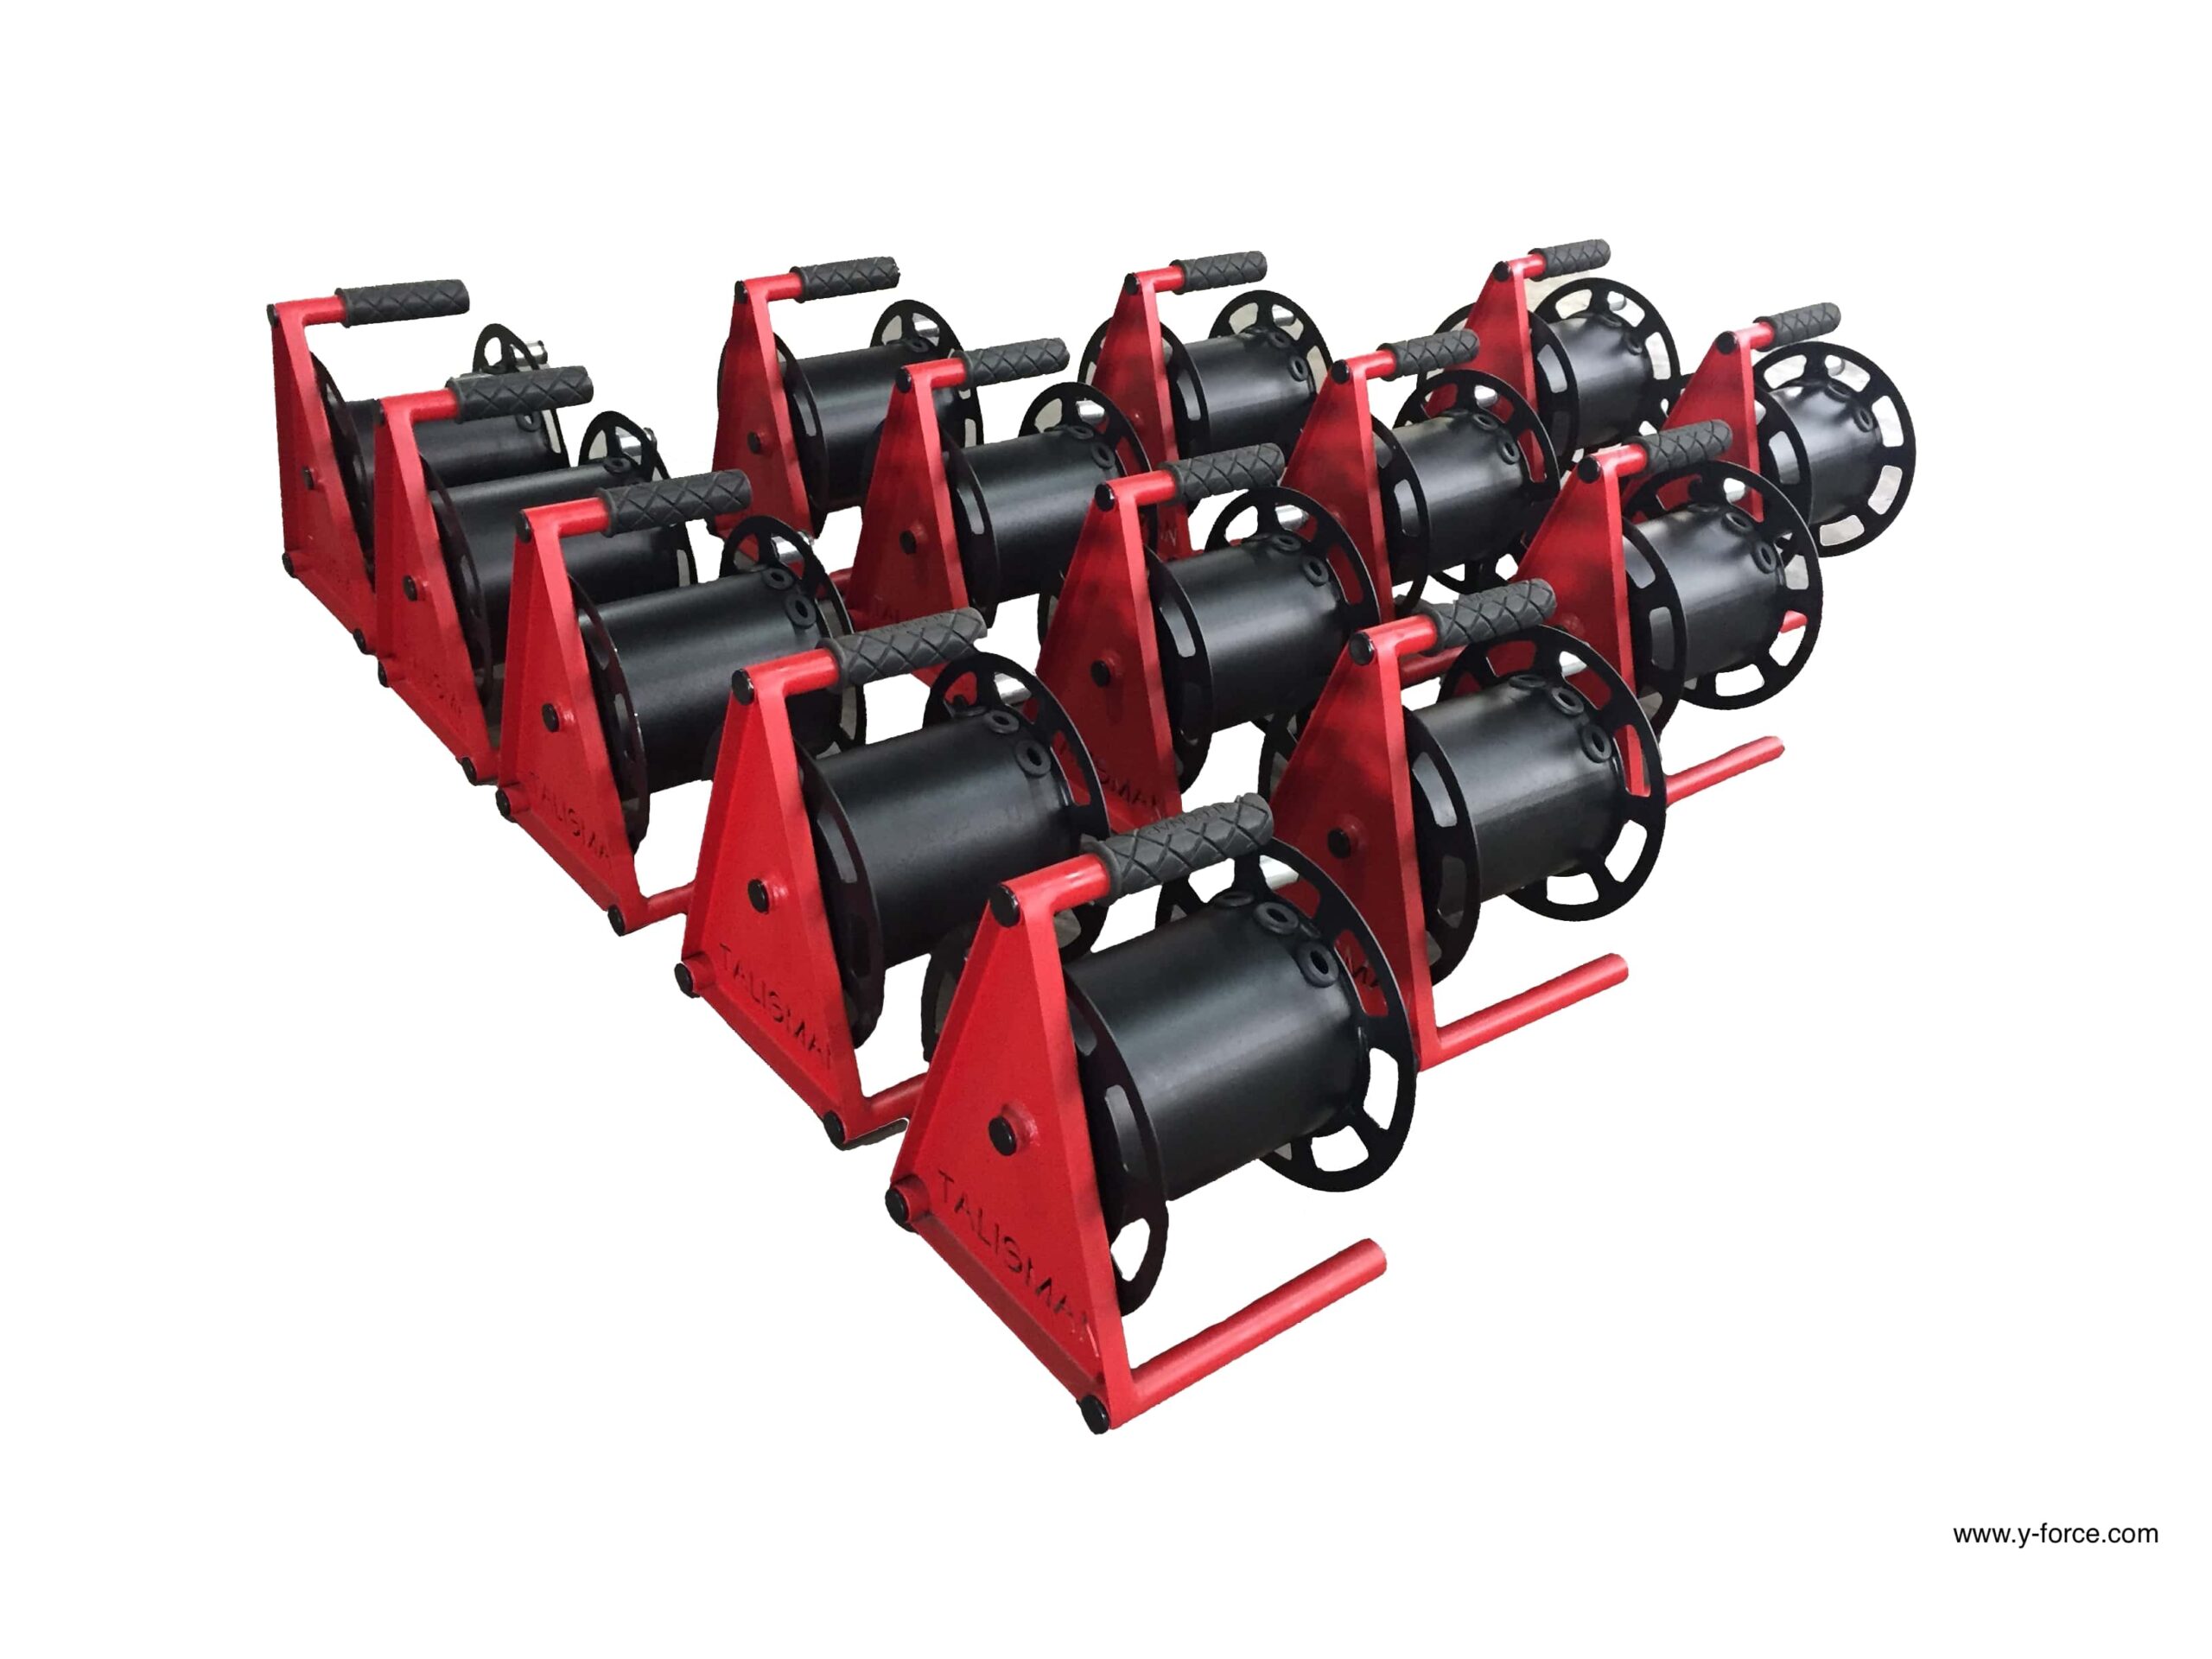 Augers in different sizes